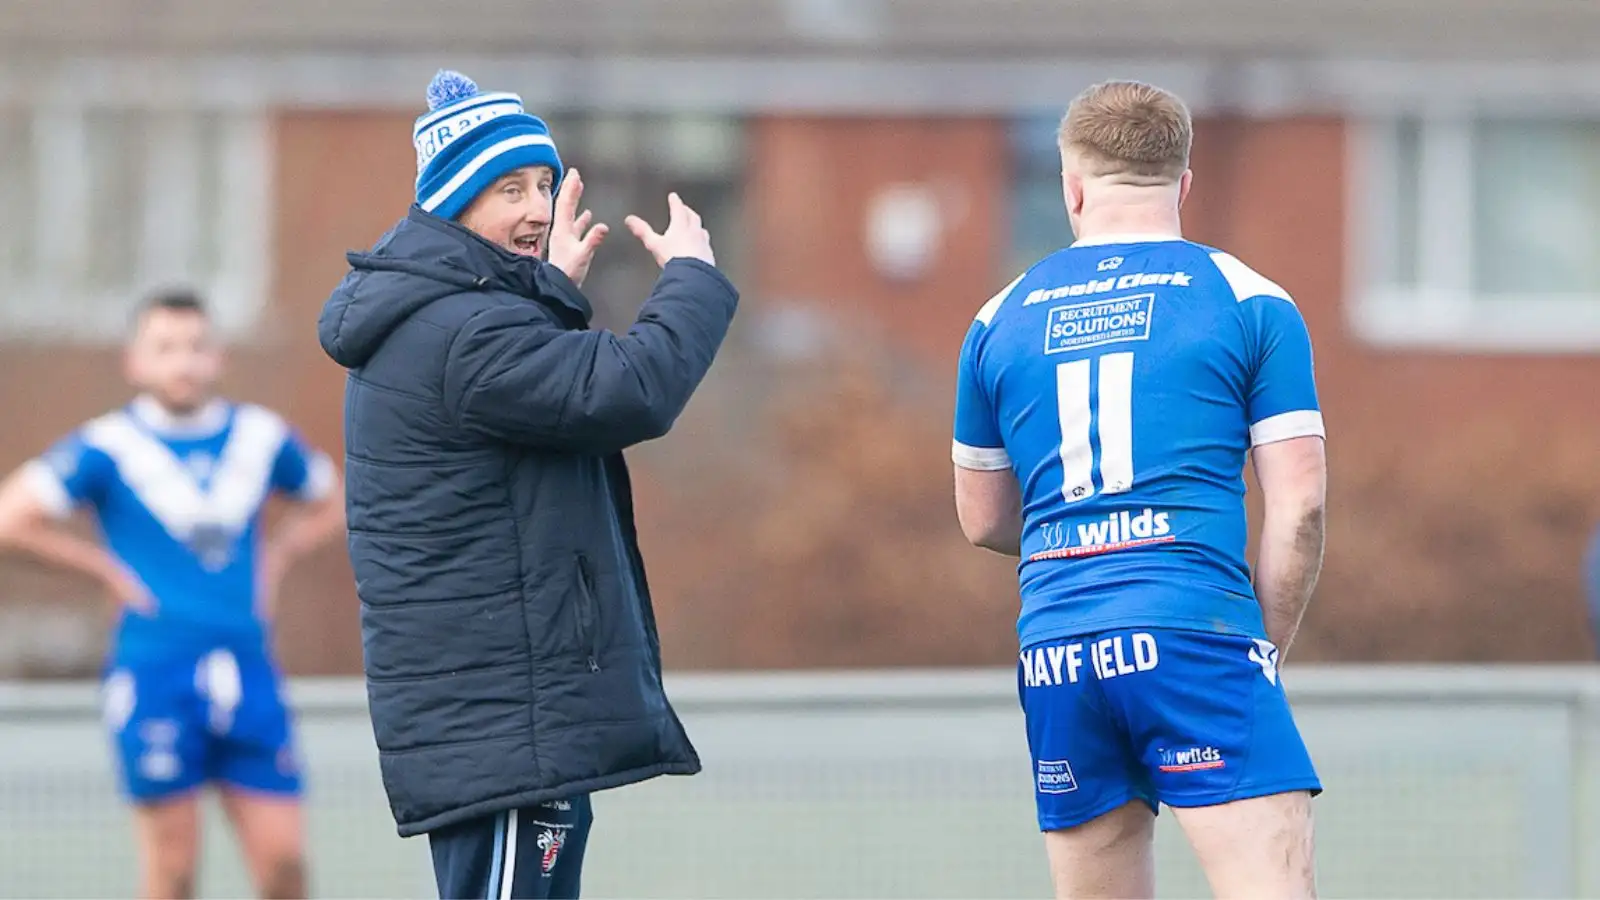 Rochdale Mayfield hoping to strike lucky in Challenge Cup fourth round